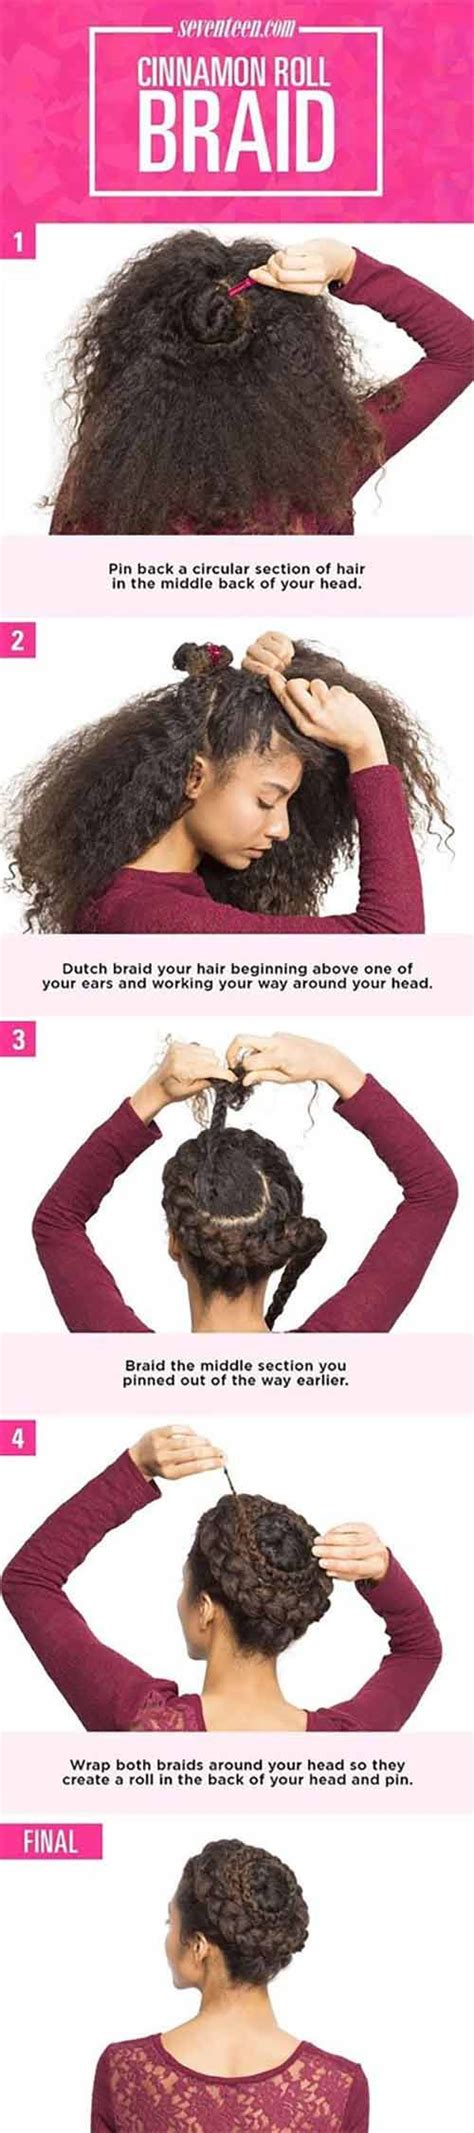 20 Incredibly Stunning Diy Updos For Curly Hair Curly Hair Styles